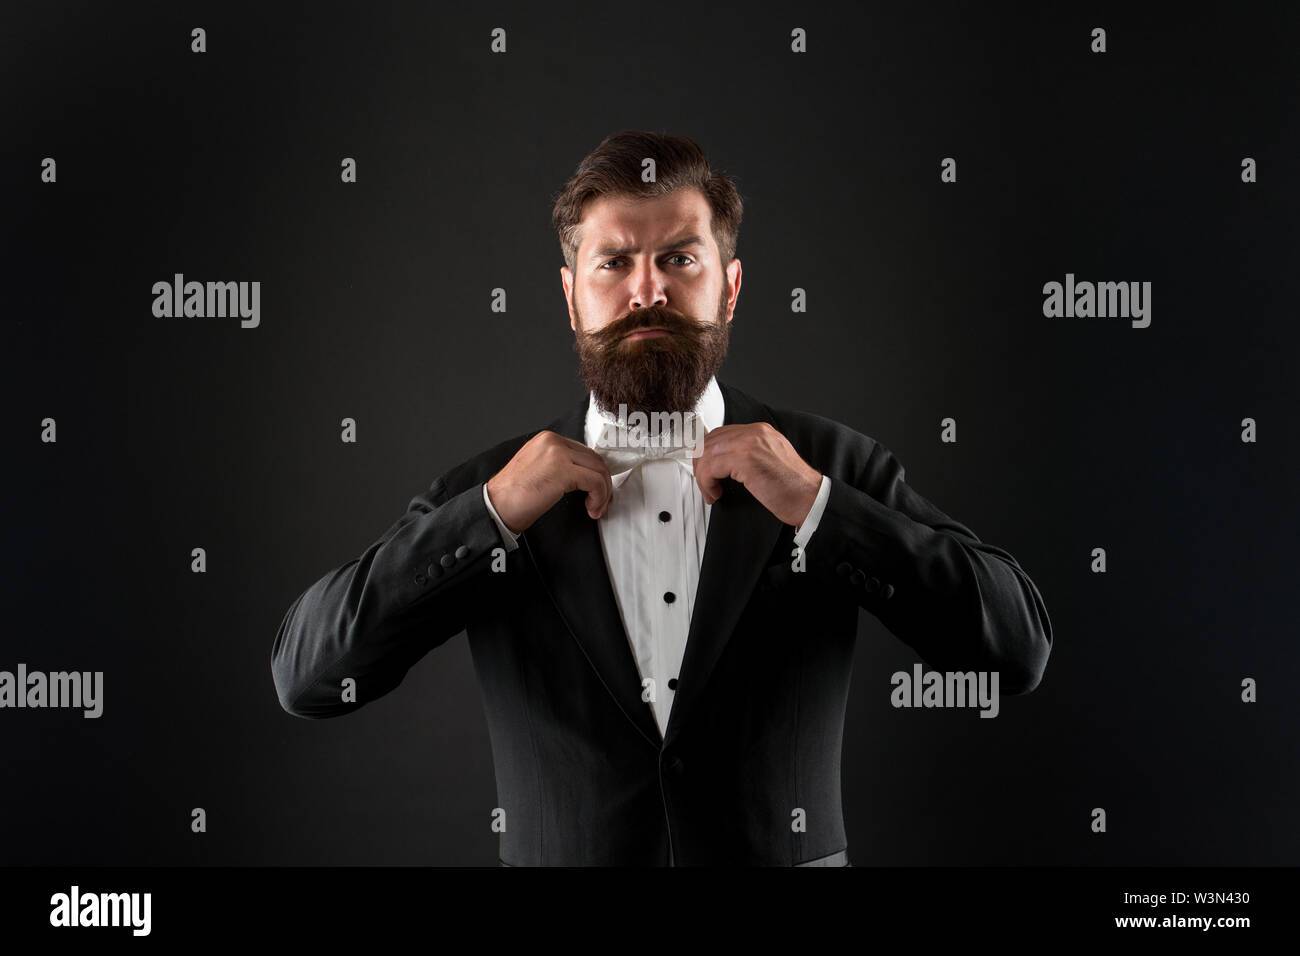 Bearded man with bow tie. Well dressed and scrupulously neat. Hipster formal suit tuxedo. Difference between vintage and classic. Official event dress code. Classic style. Menswear classic outfit. Stock Photo